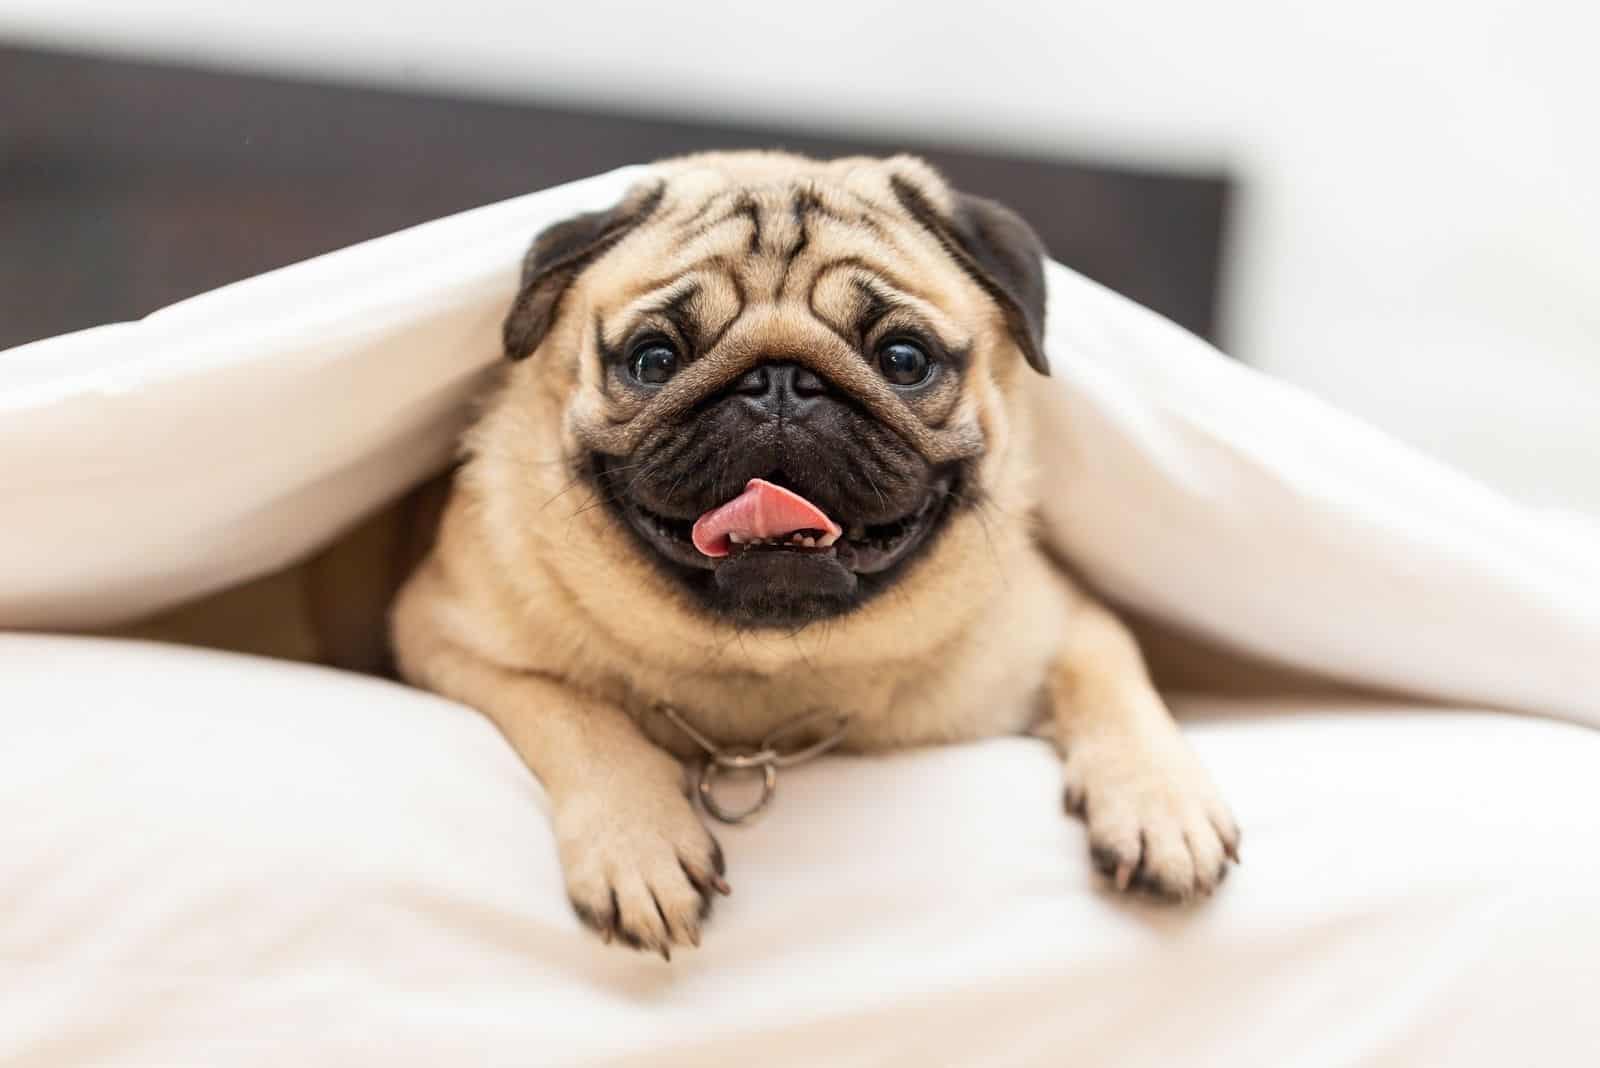 cute pug dog lying down on bed underneath the sheets